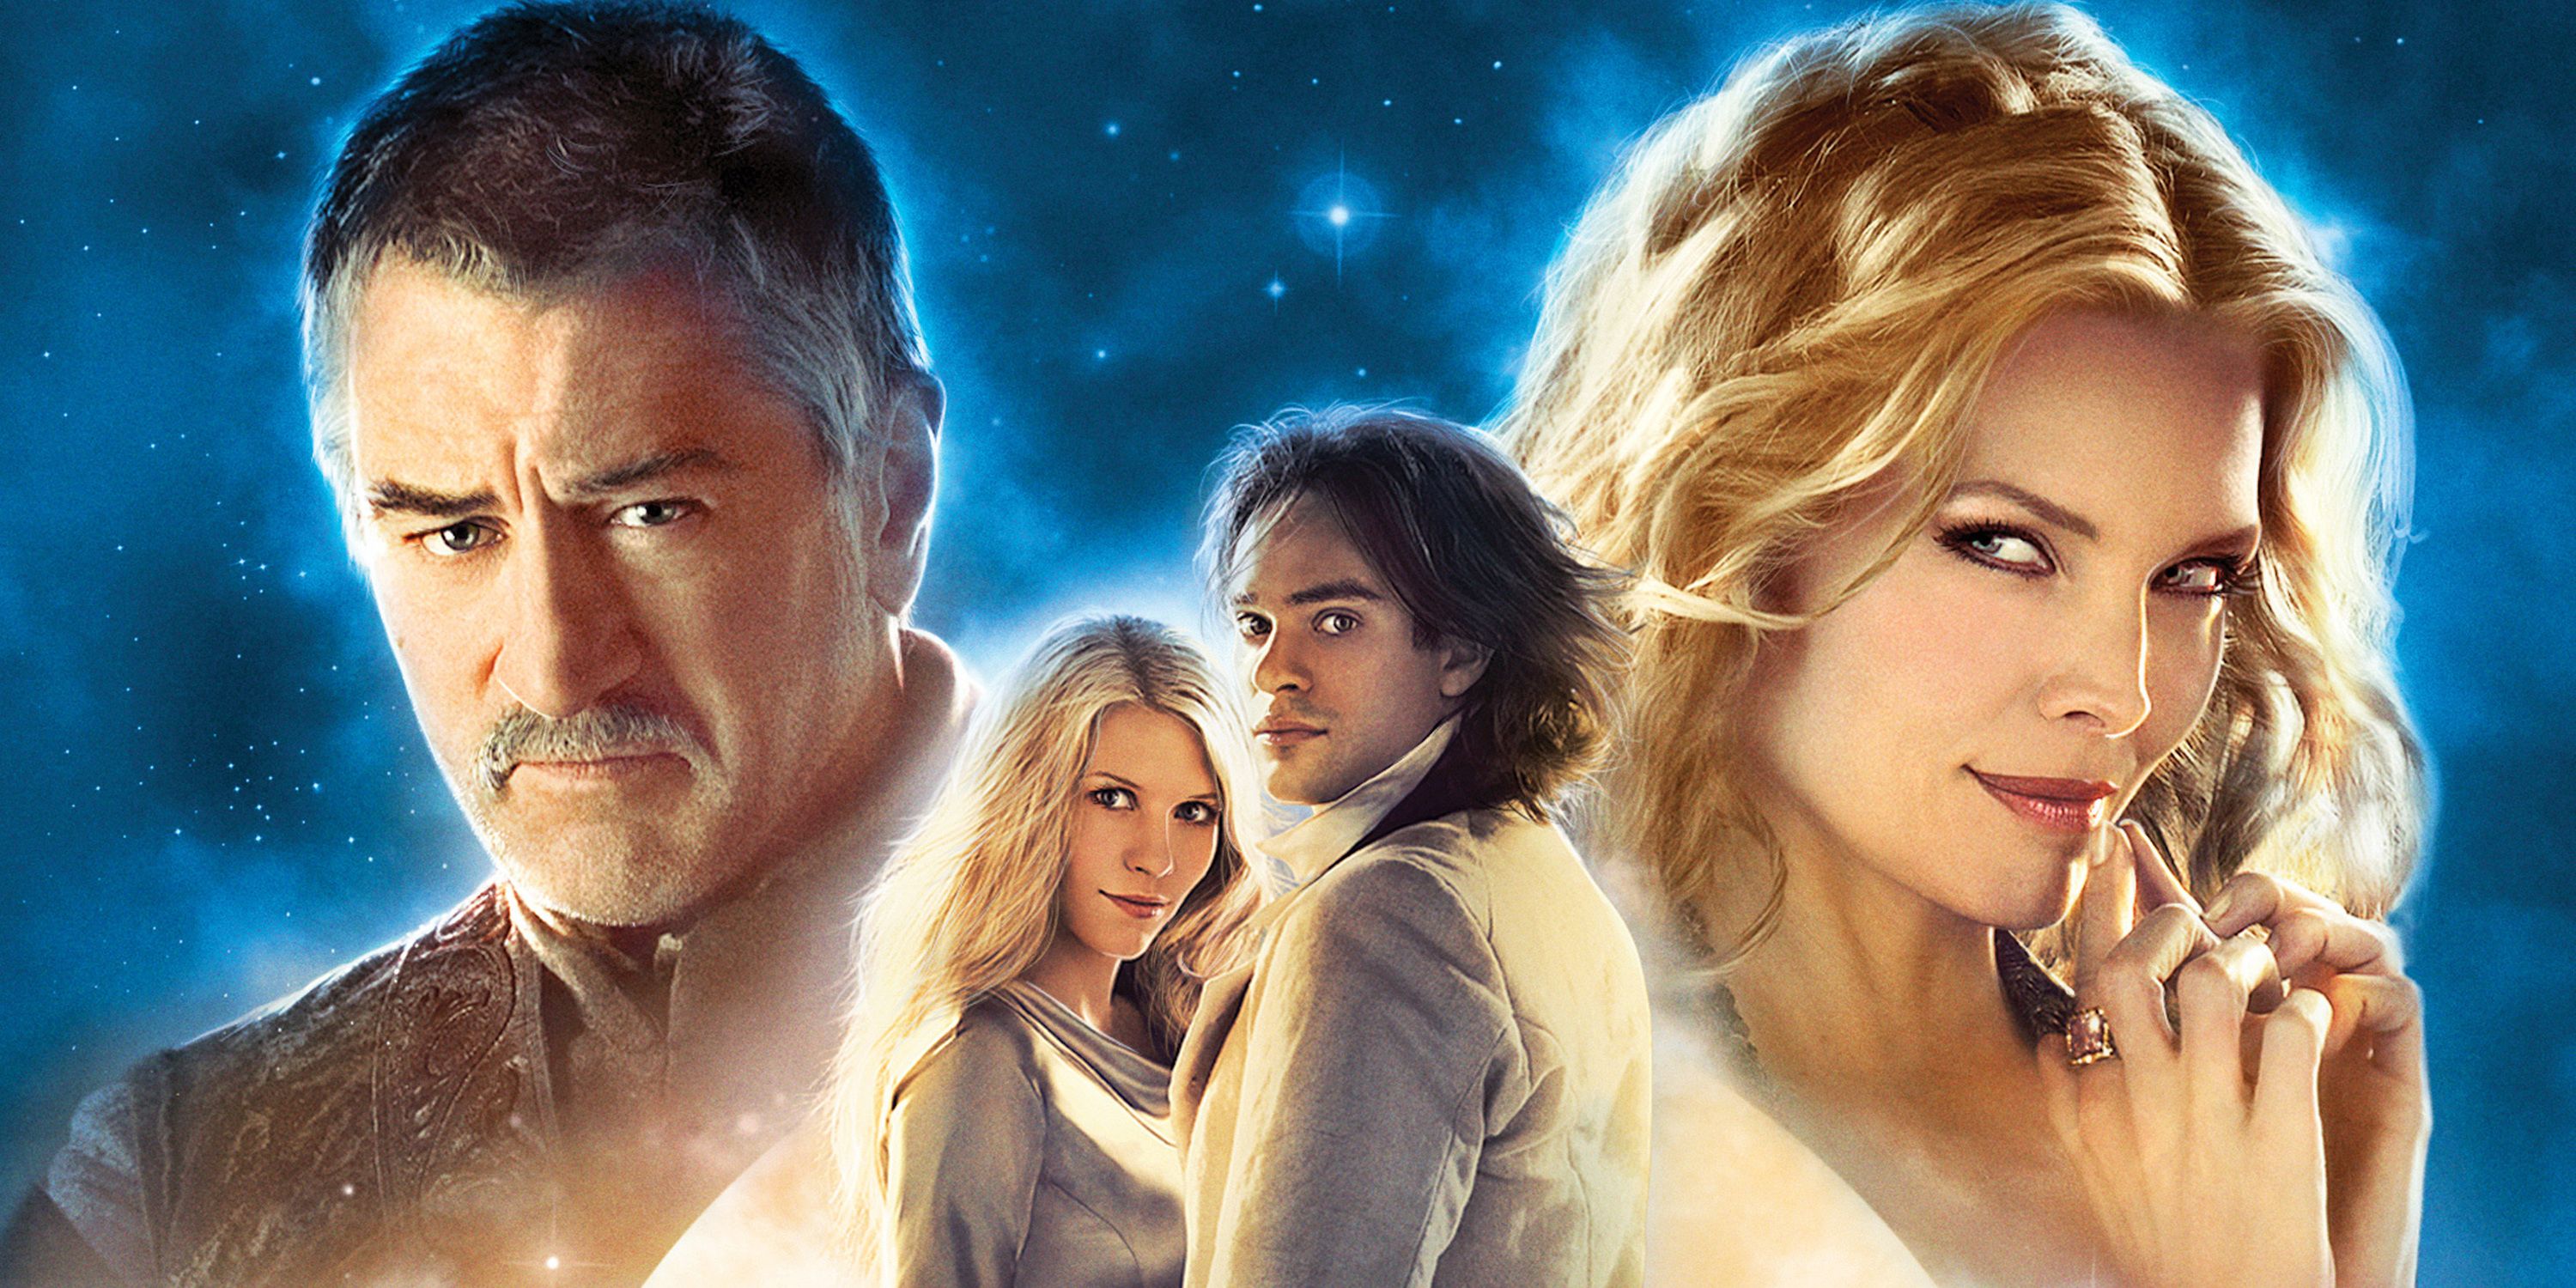 Robert De Niro, Claire Danes, Charlie Cox, and Michelle Pfeiffer on the Stardust Poster